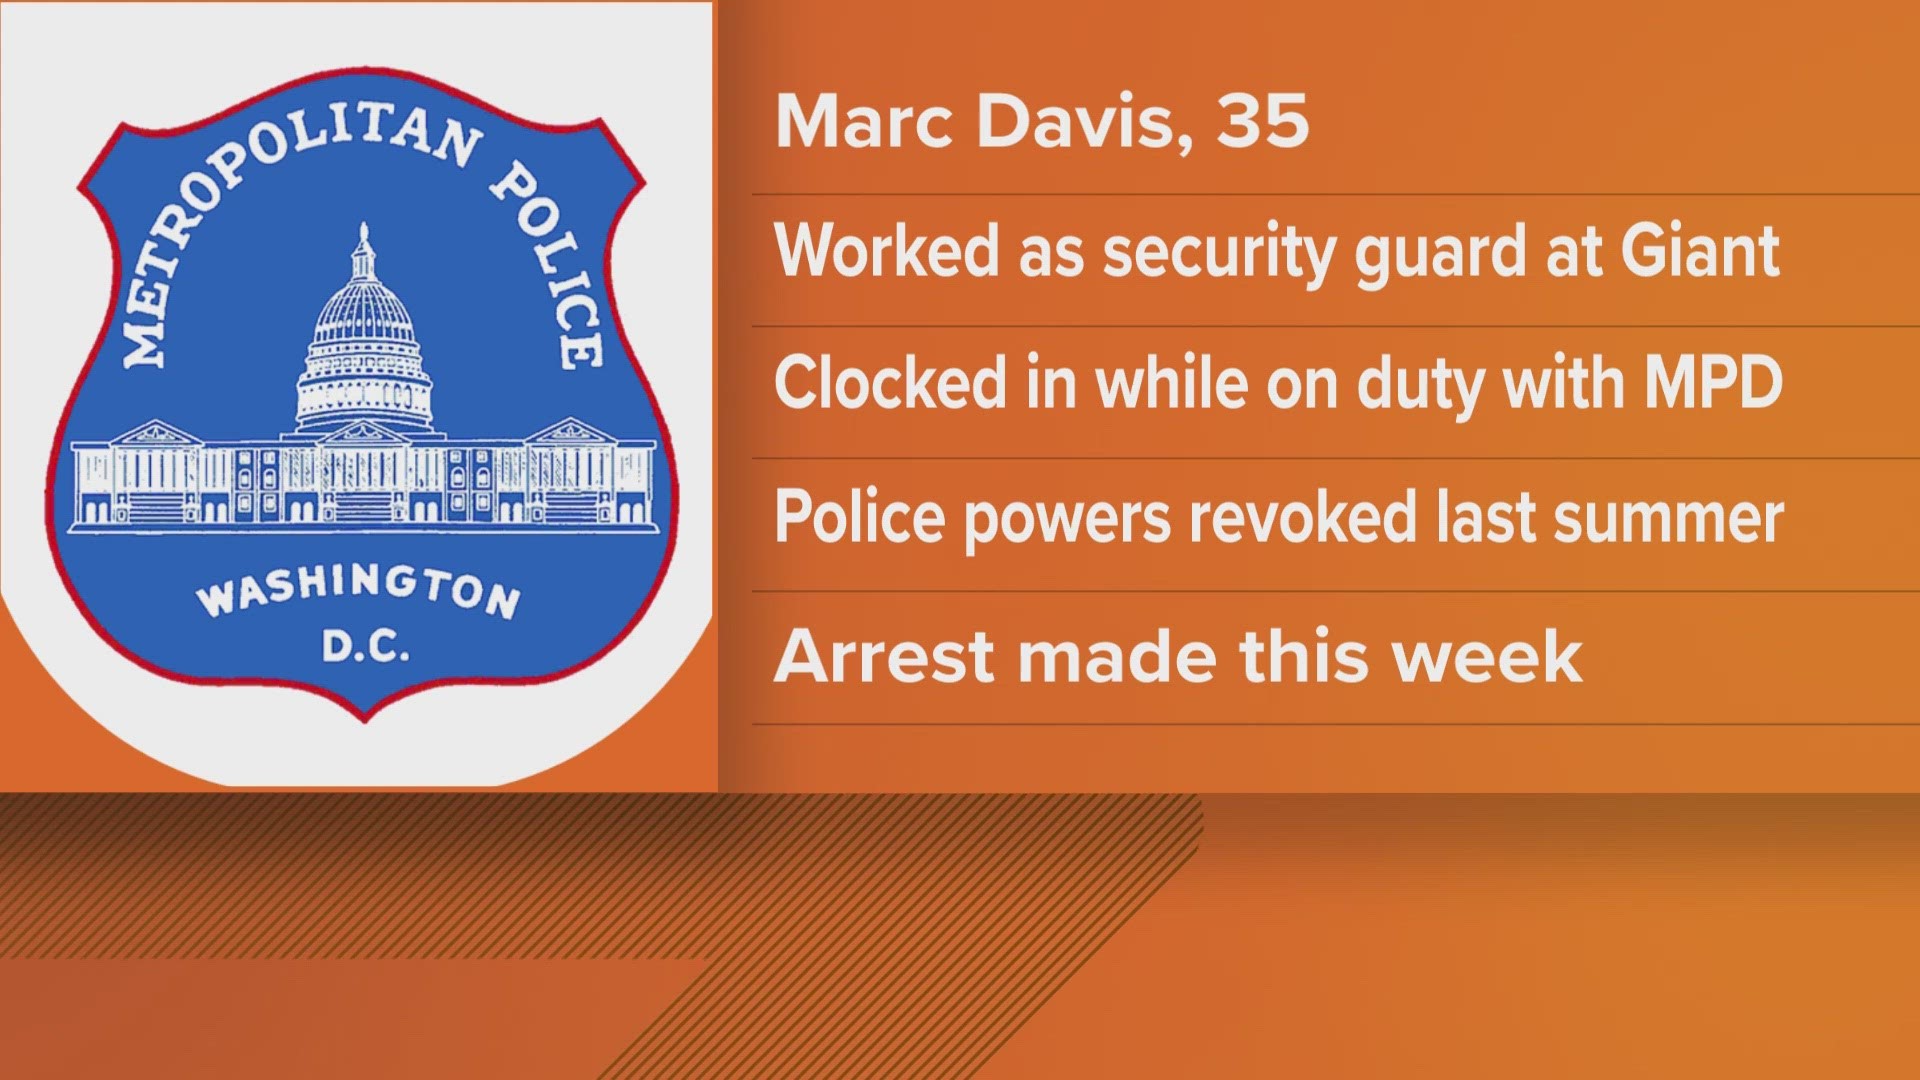 Officer Marc Davis was allegedly working a second job at Giant while on duty with MPD